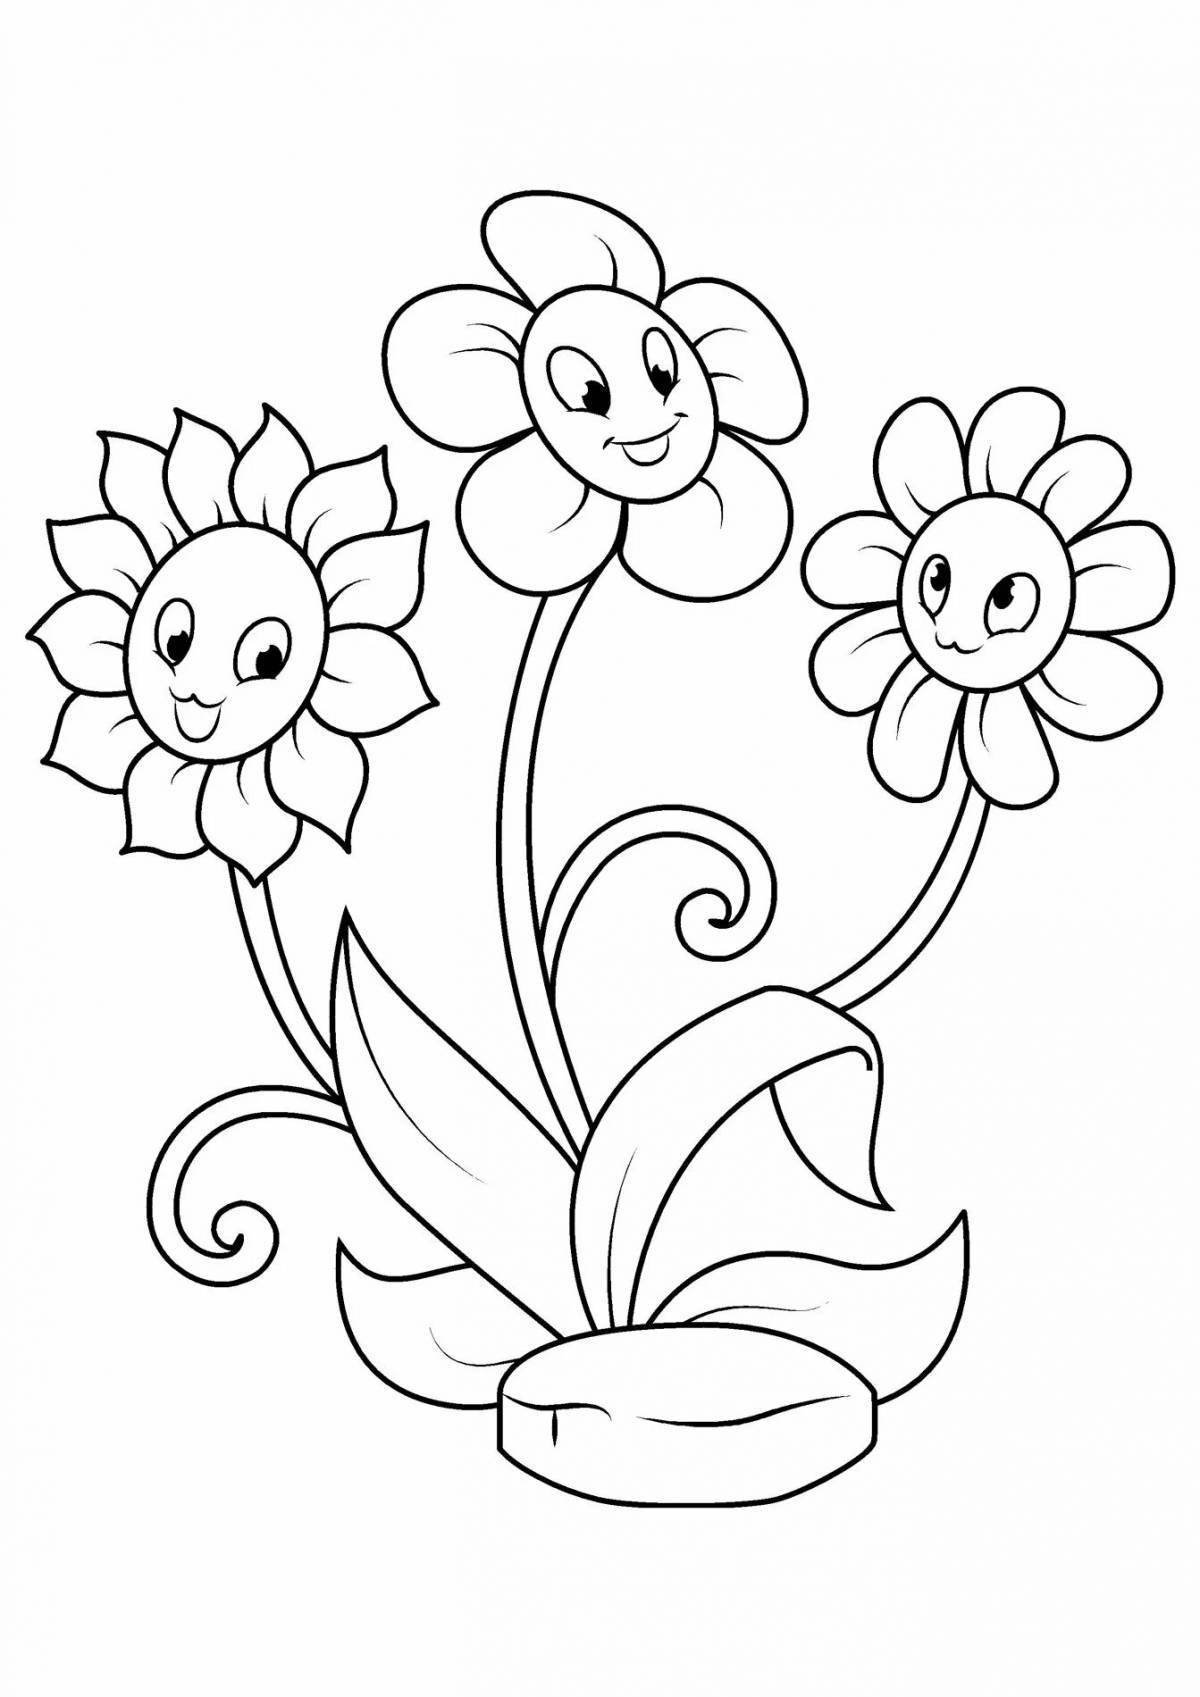 Fun coloring flower for children 5-6 years old